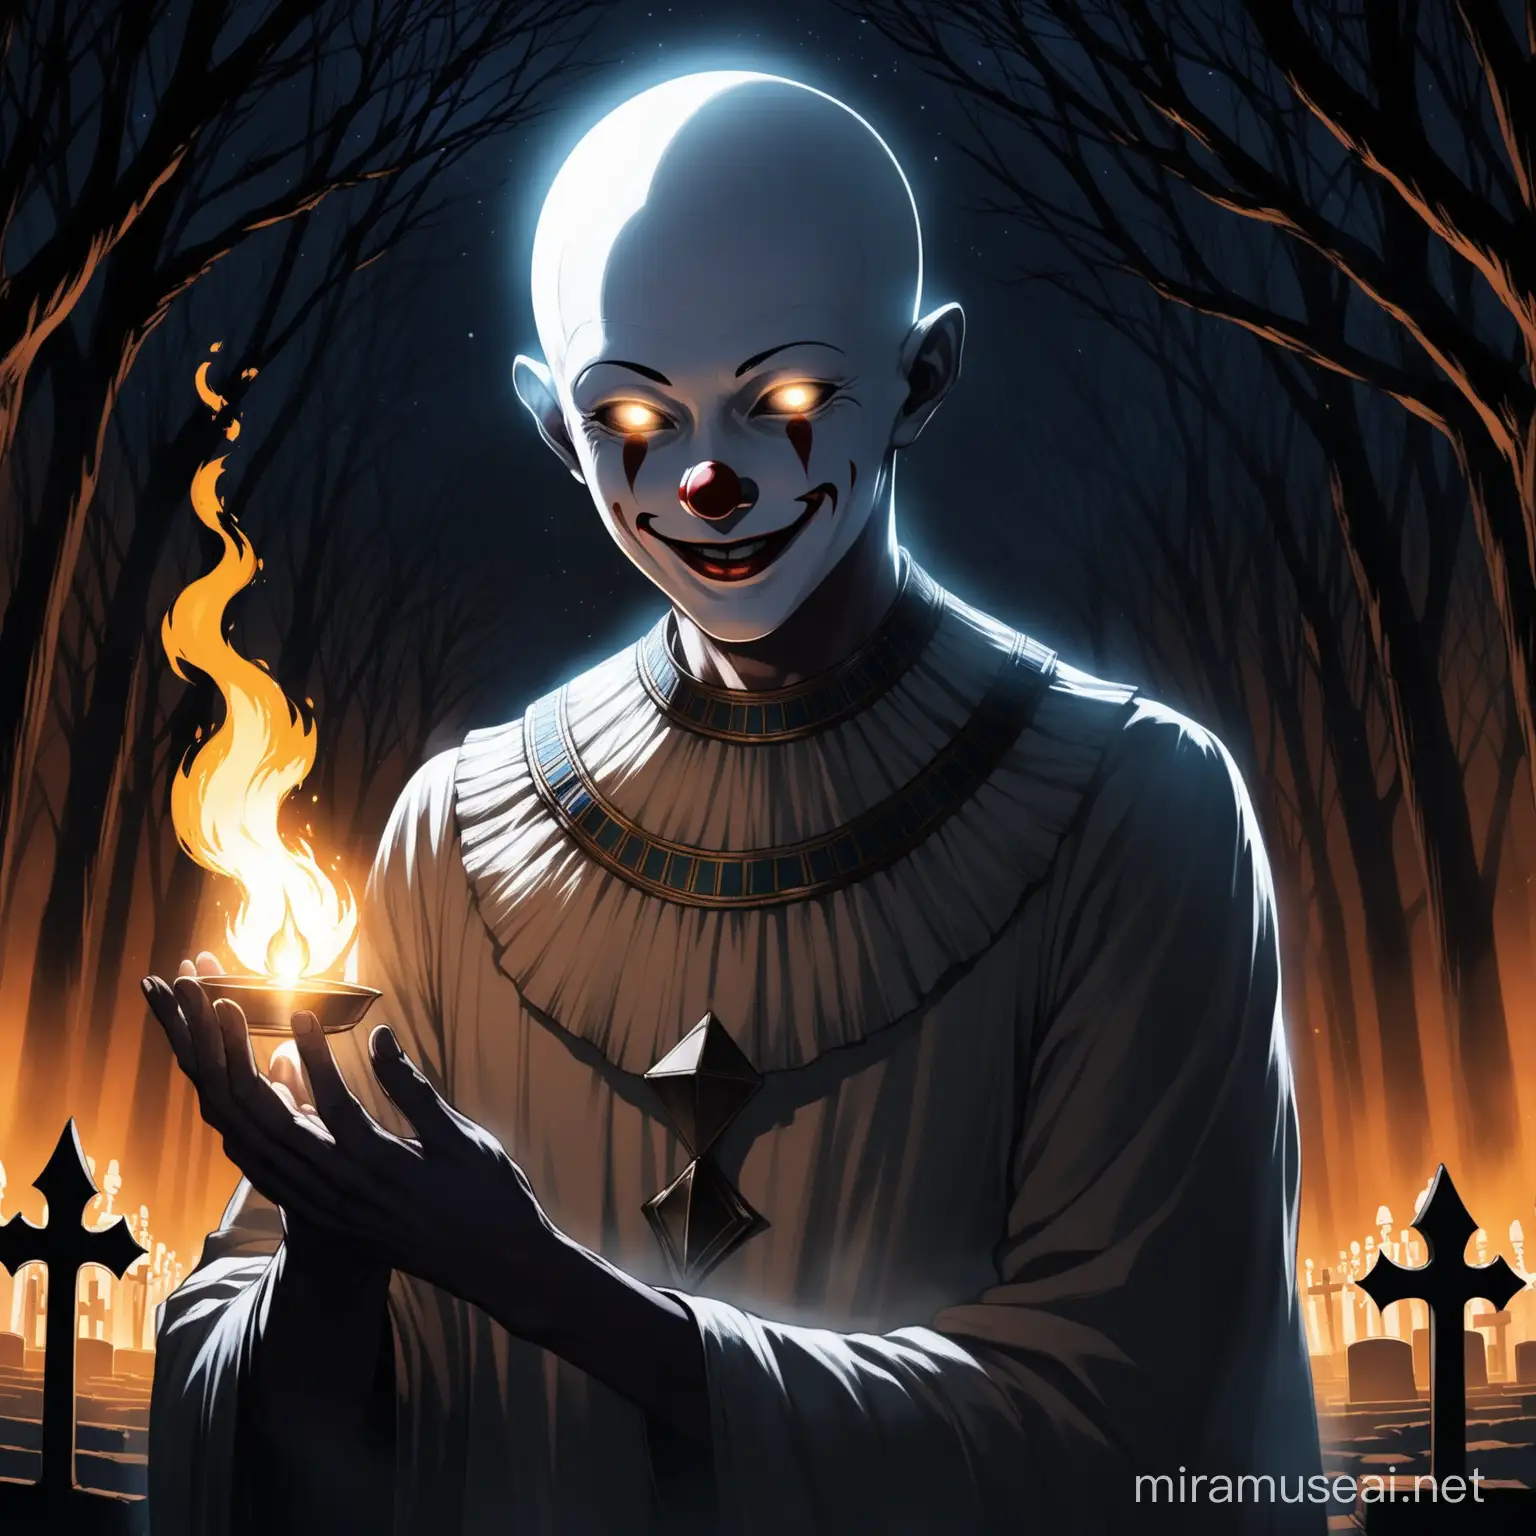 Clown Holding silver fire-anhk in the palm of his hands
appreance- close up/male/ albino skin/ hidden in shadows/  silver fire-anhk/smiling/ hairless/ 
background- sillouette of trees/ night/egyptian cemetery